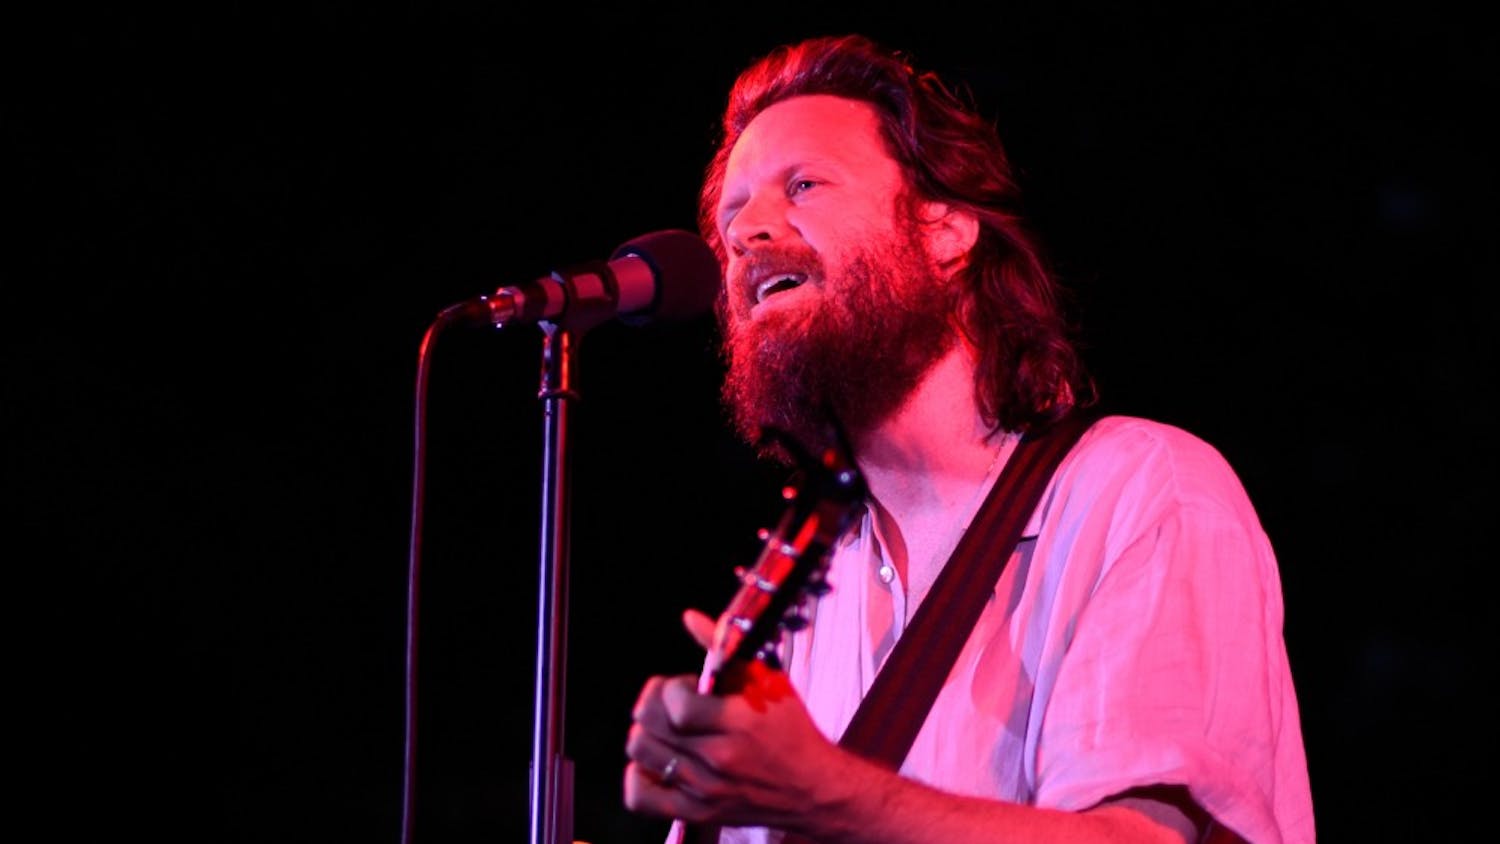 Father John Misty performs Friday evening at Upland Brewing Co. as part of Granfalloon: A Kurt Vonnegut Convergence. The festival, a celebration of the life and works of Kurt Vonnegut, will feature artists Noname, Waxahatchee and others Saturday.